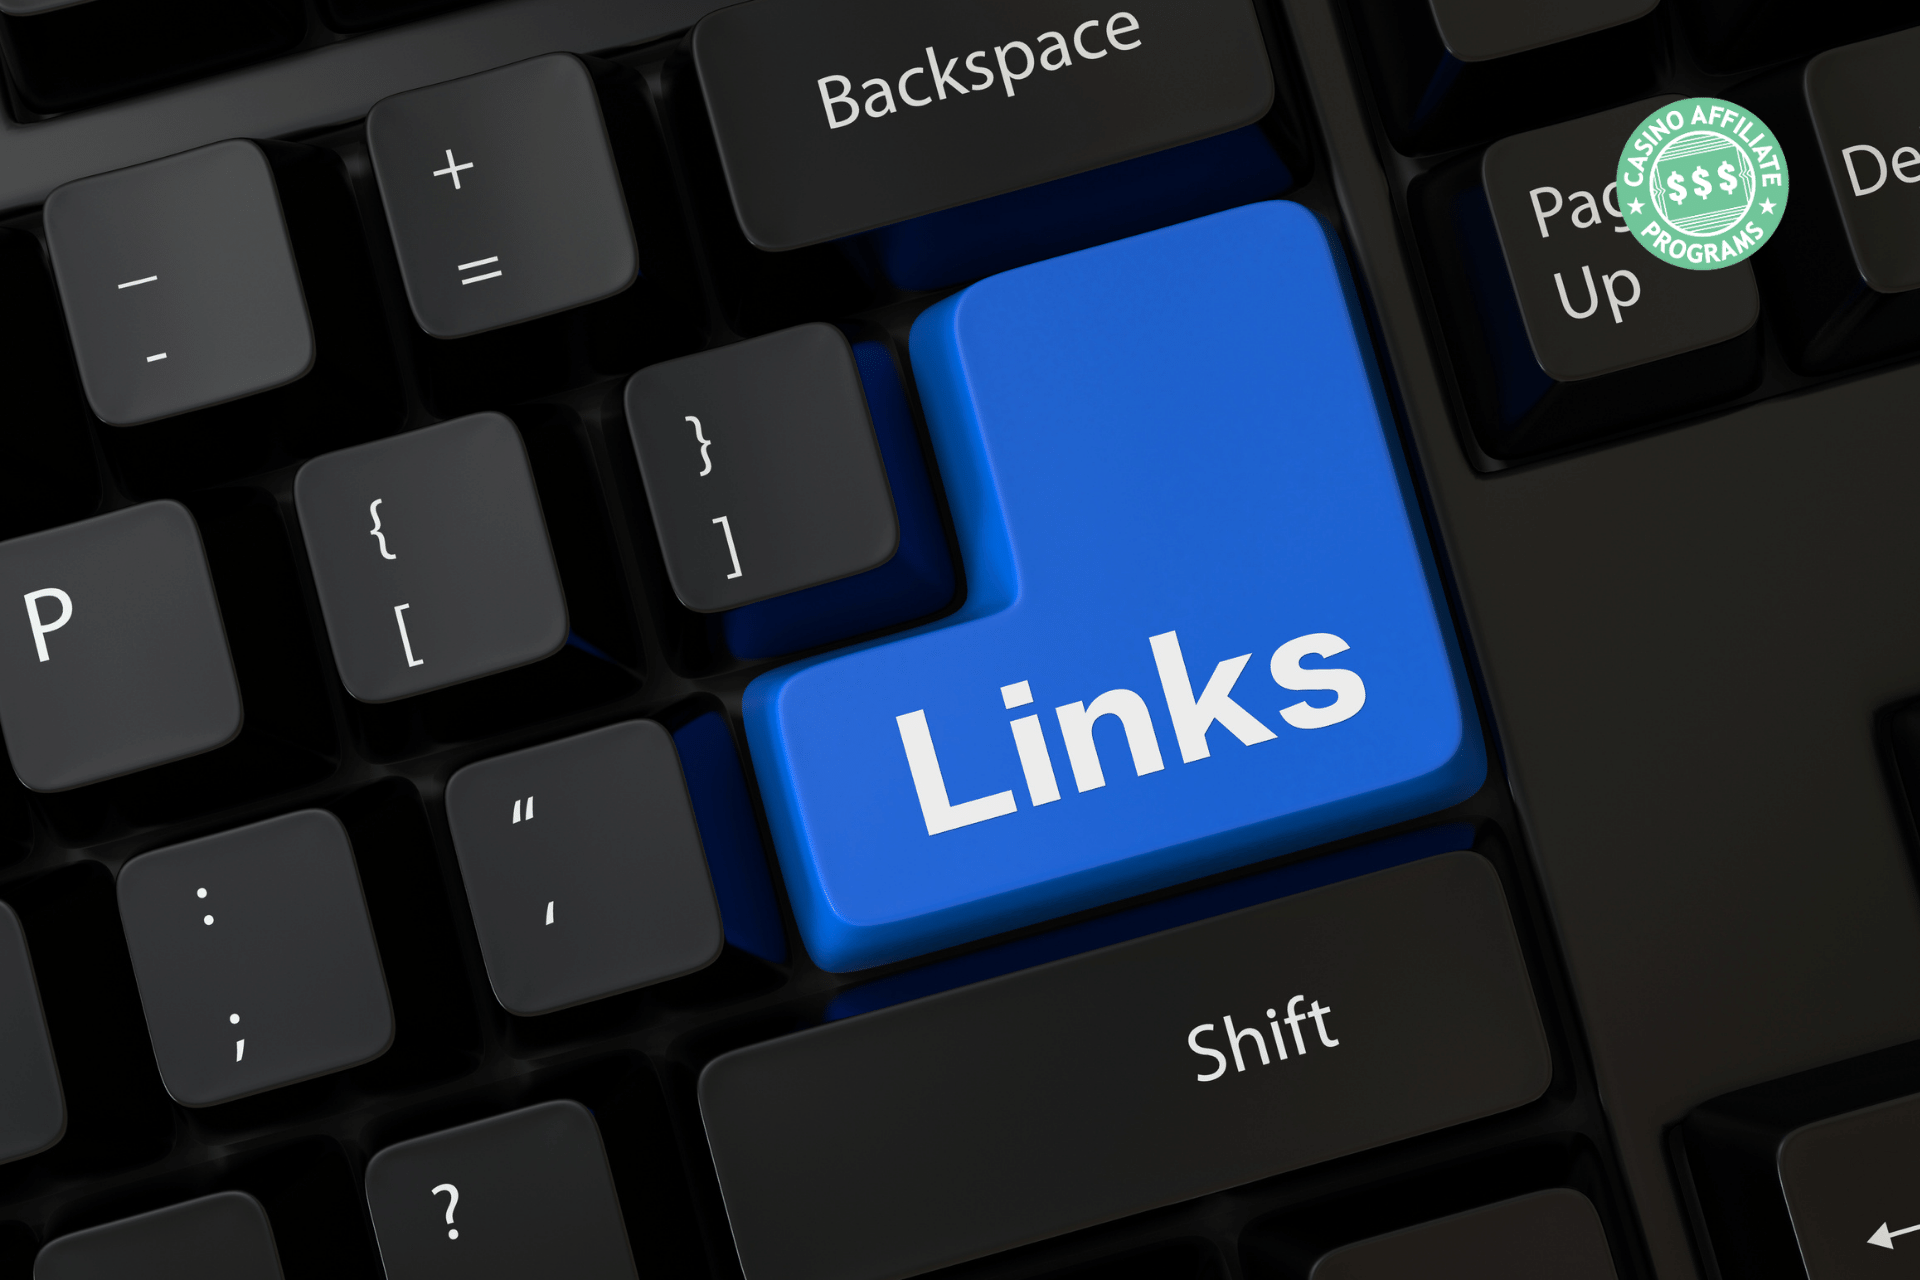 How to Link Build Without Potentially Harming Your Business